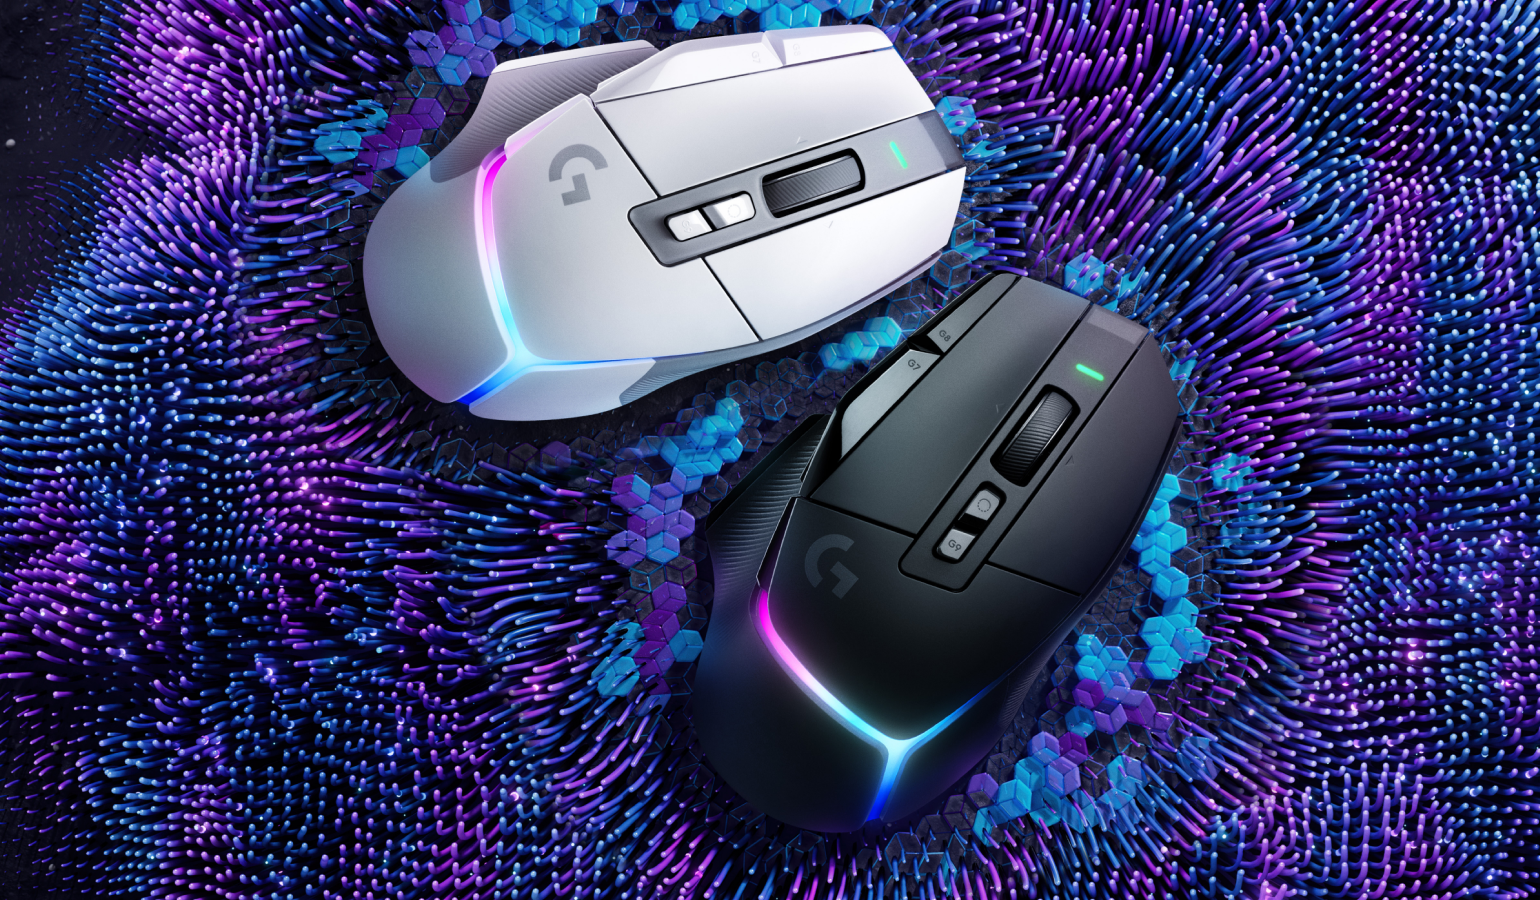 Logitech's G502 X modernizes its bestselling gaming mouse | DeviceDaily.com